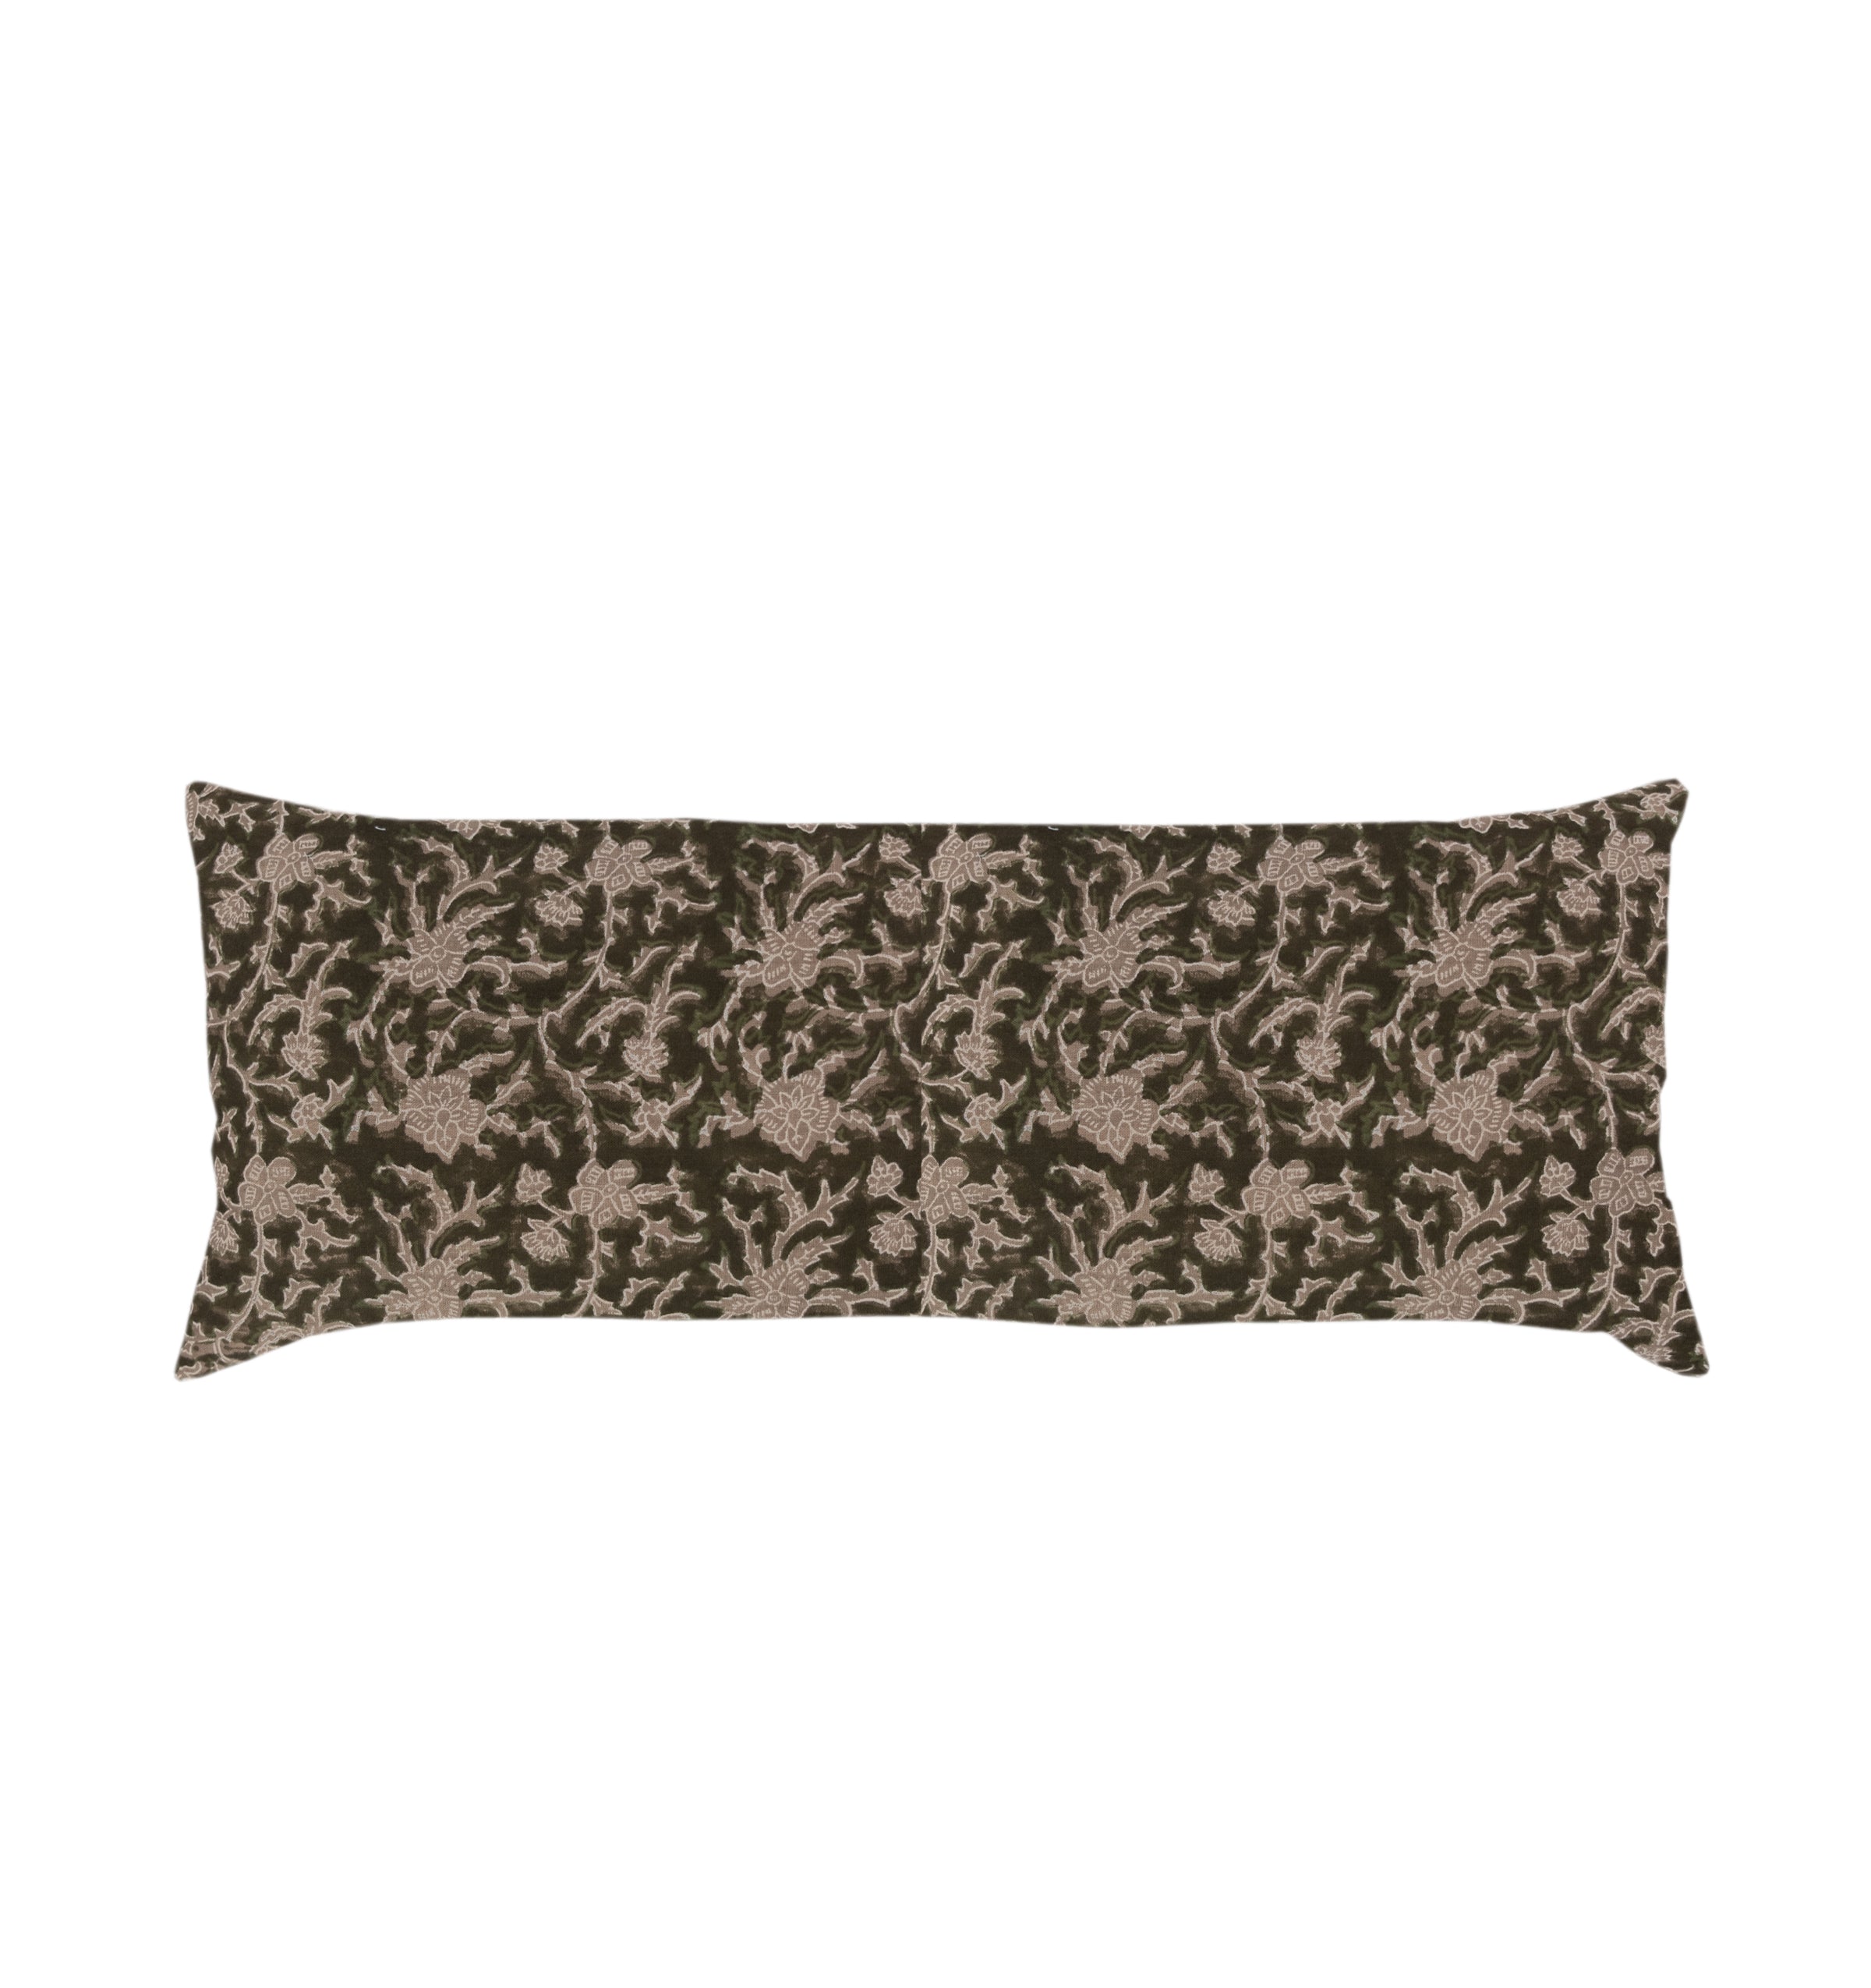 Brittany Olive Linen Pillow